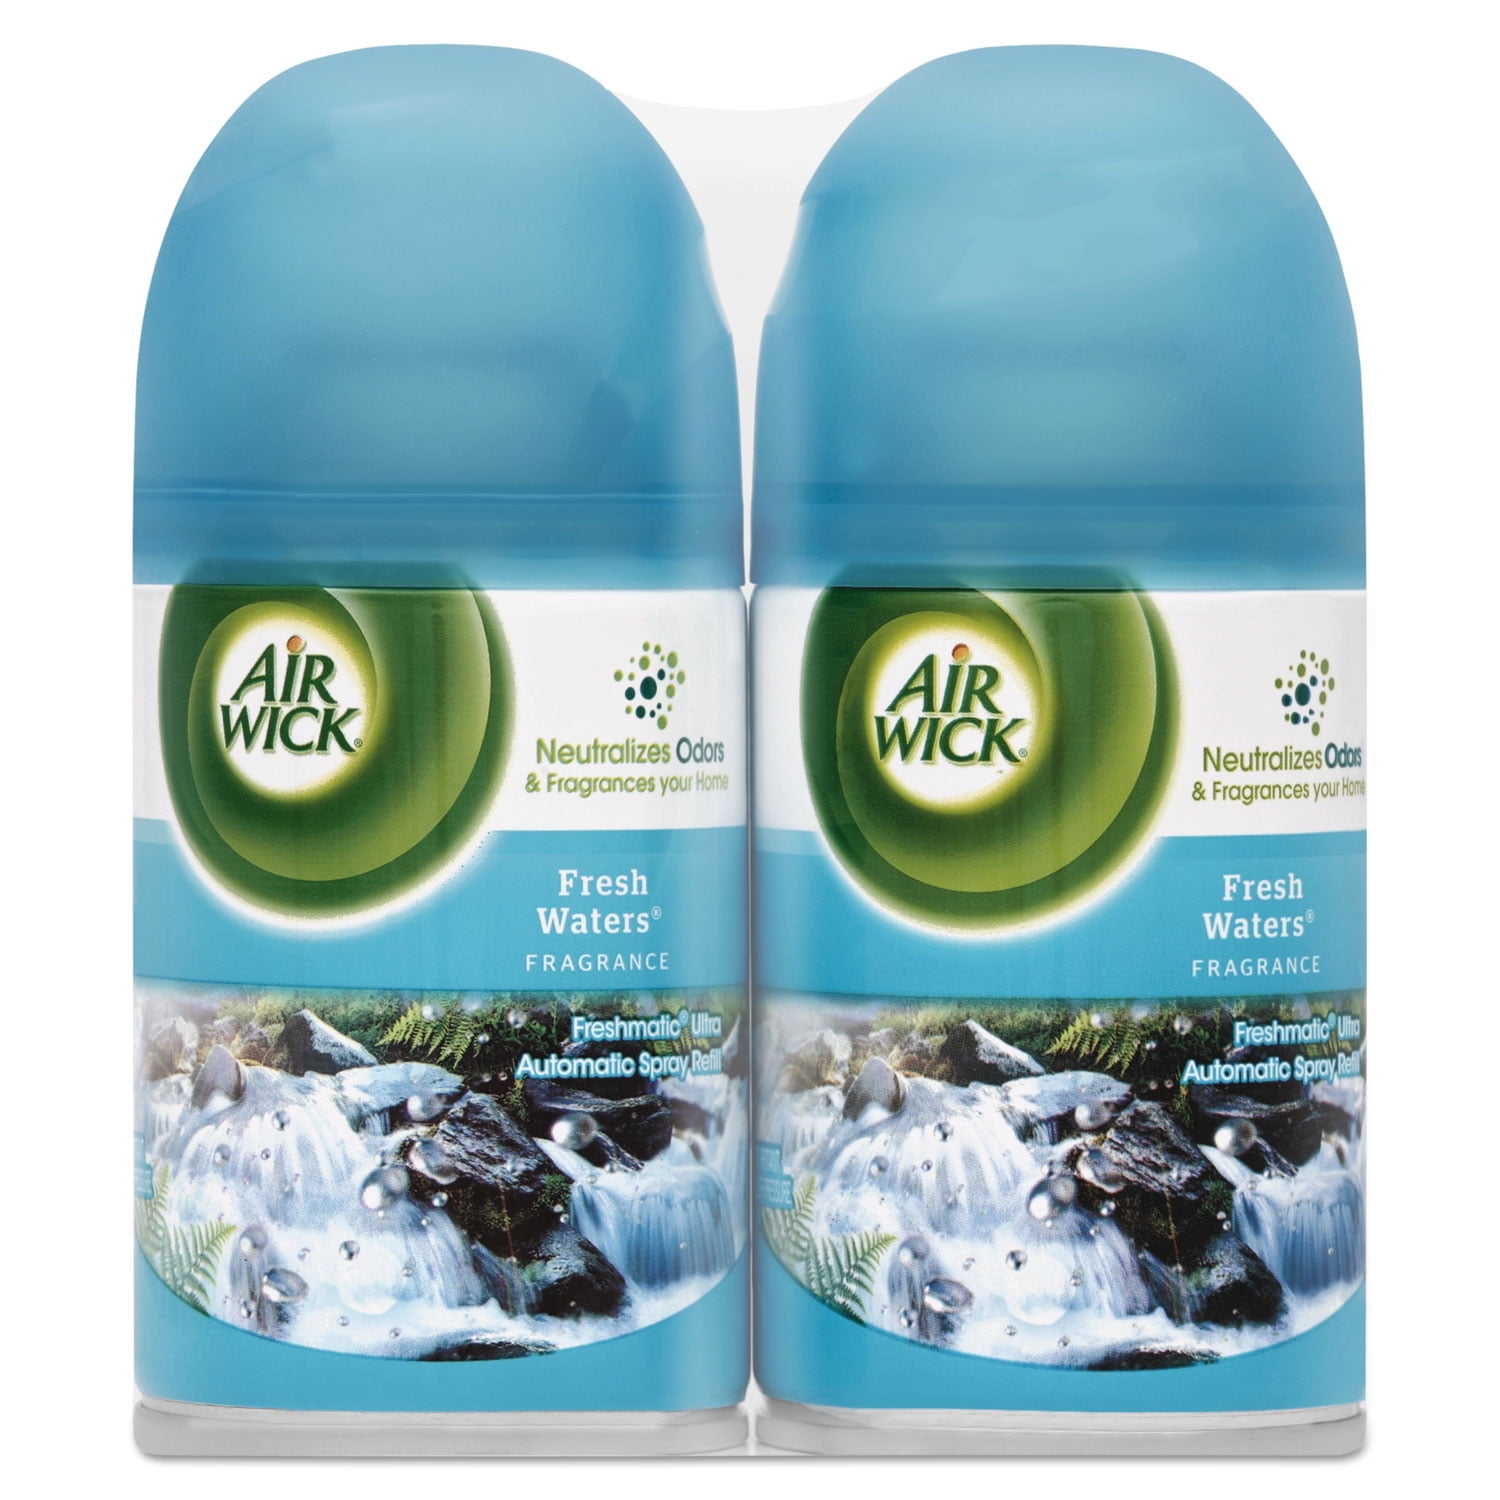 AIR WICK, Freshmatic®, 6.2 oz Container Size, Metered Air Freshener Refill  - 20L010